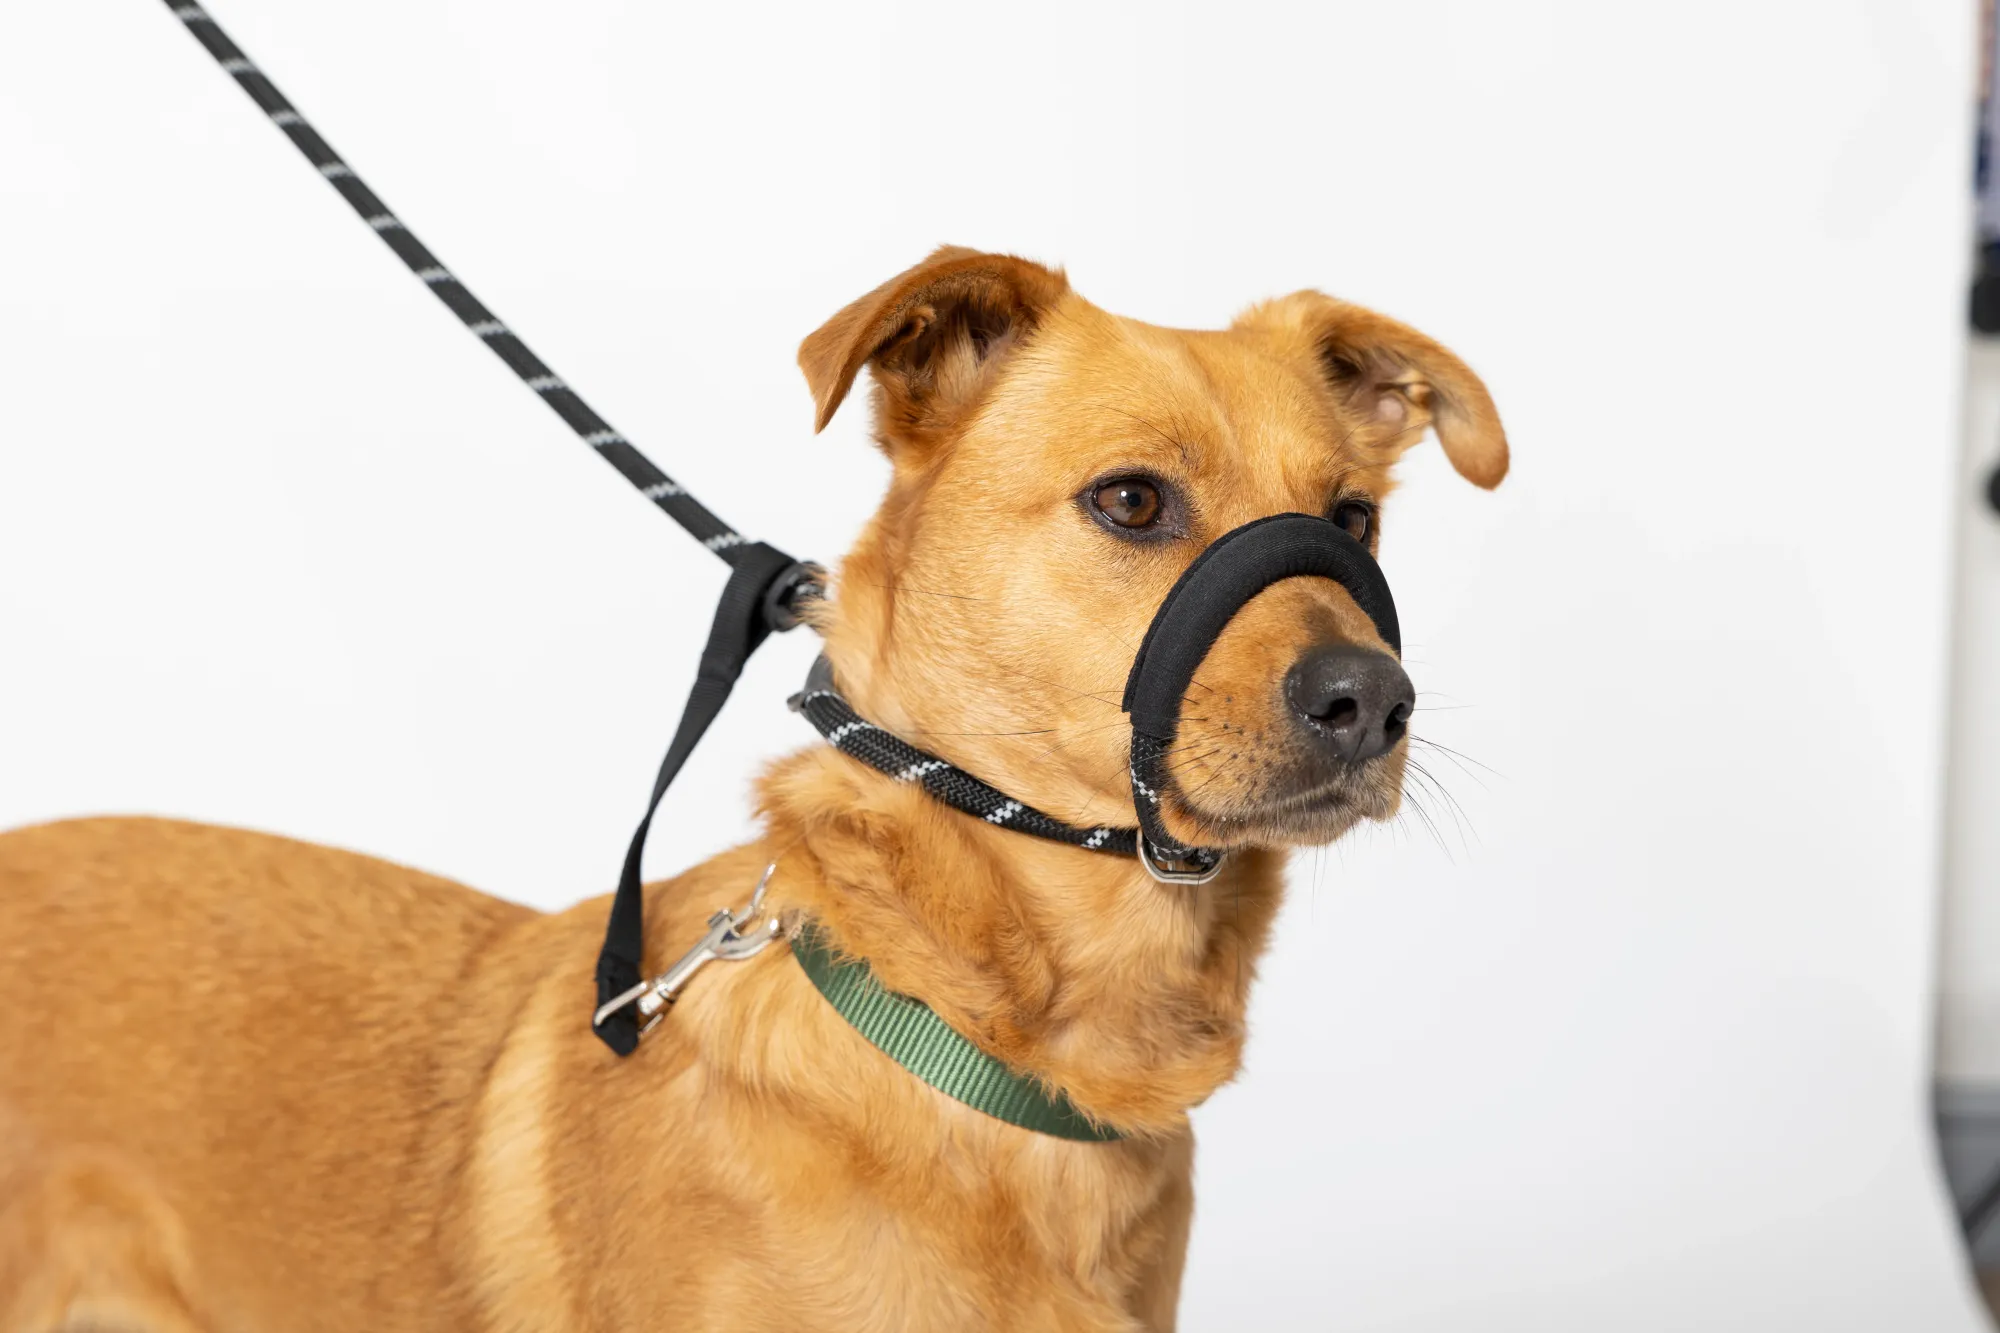 Dog with collars and harness